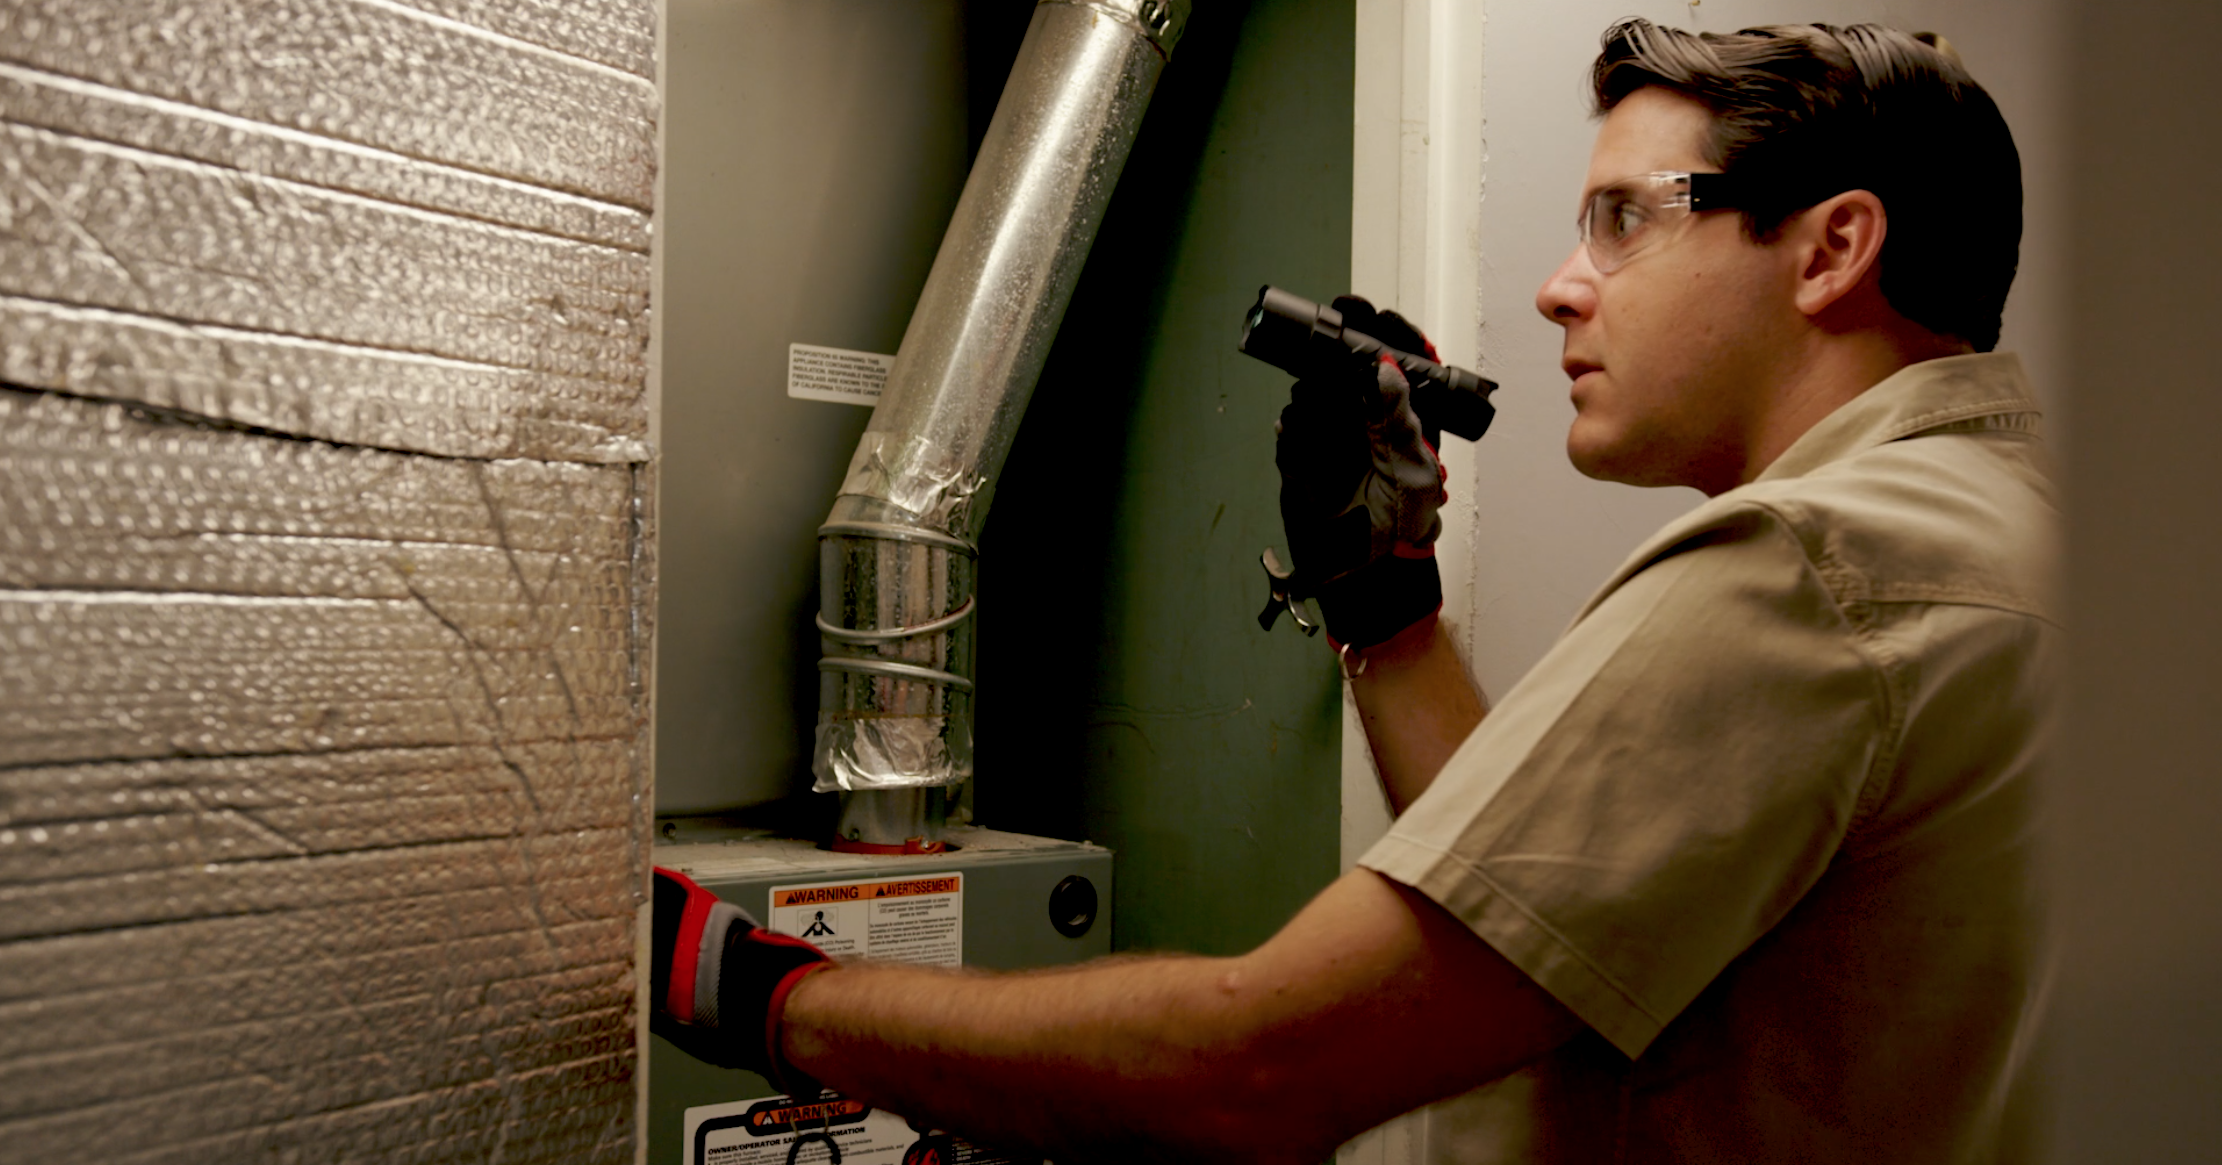 Serviceman inspecting air ducts inside a home